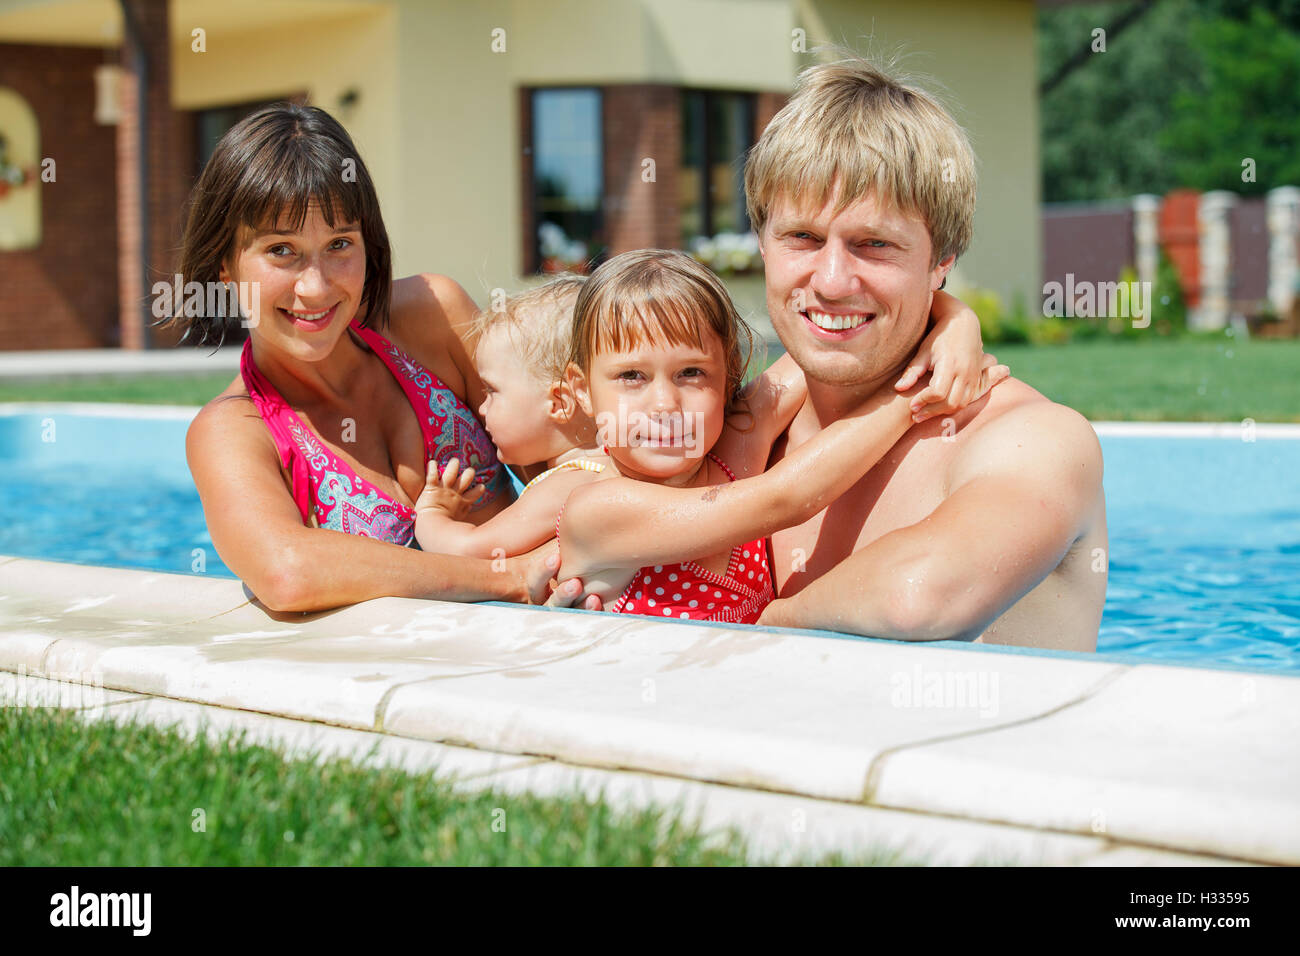 Family playing in swimming pool. Stock Photo